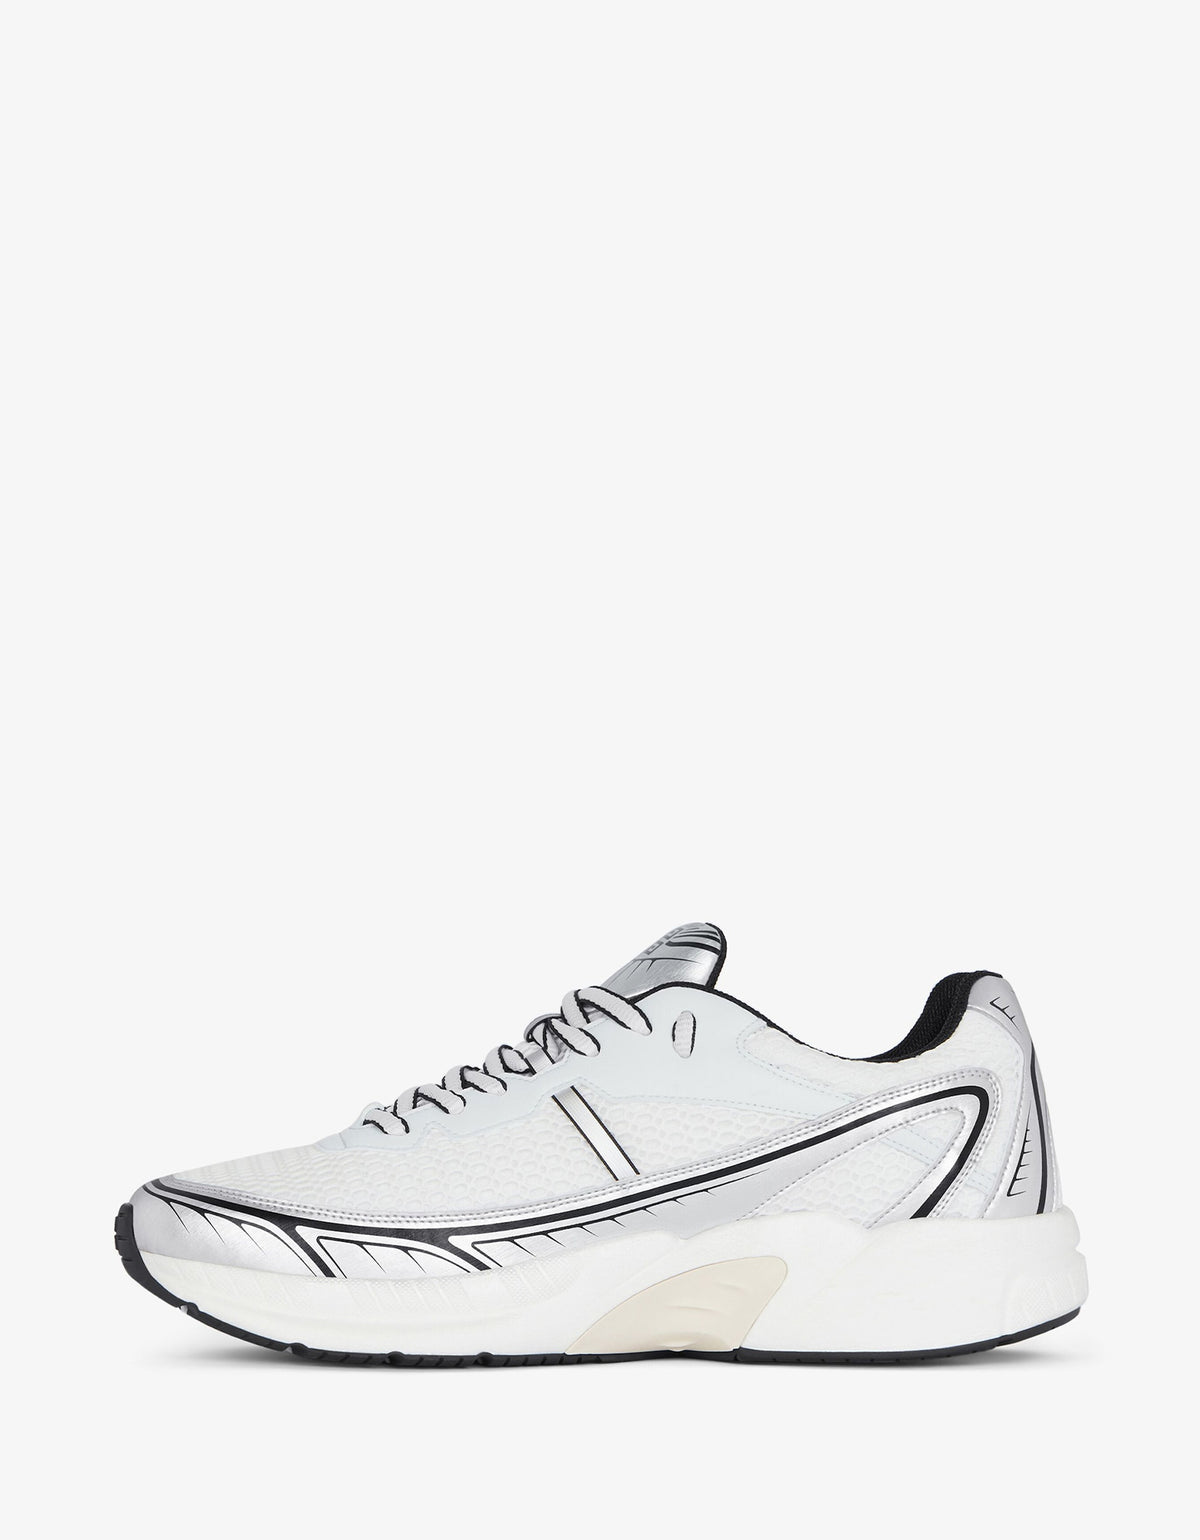 Givenchy White and Silver NFNTY-52 Runners